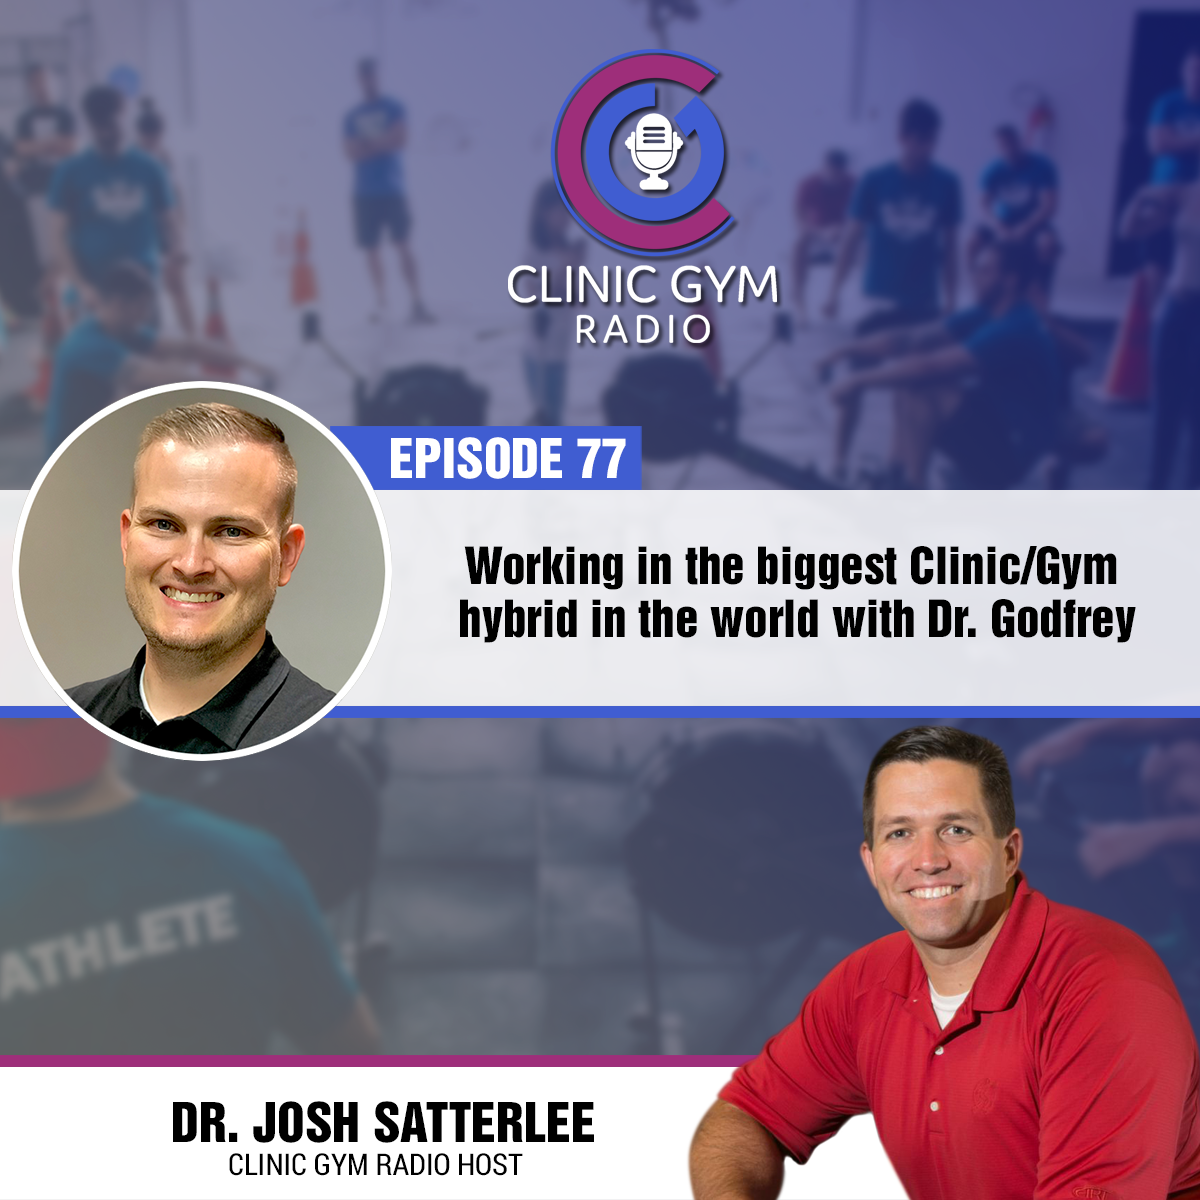 “Working in the biggest Clinic/Gym hybrid in the world with Dr. Godfrey”